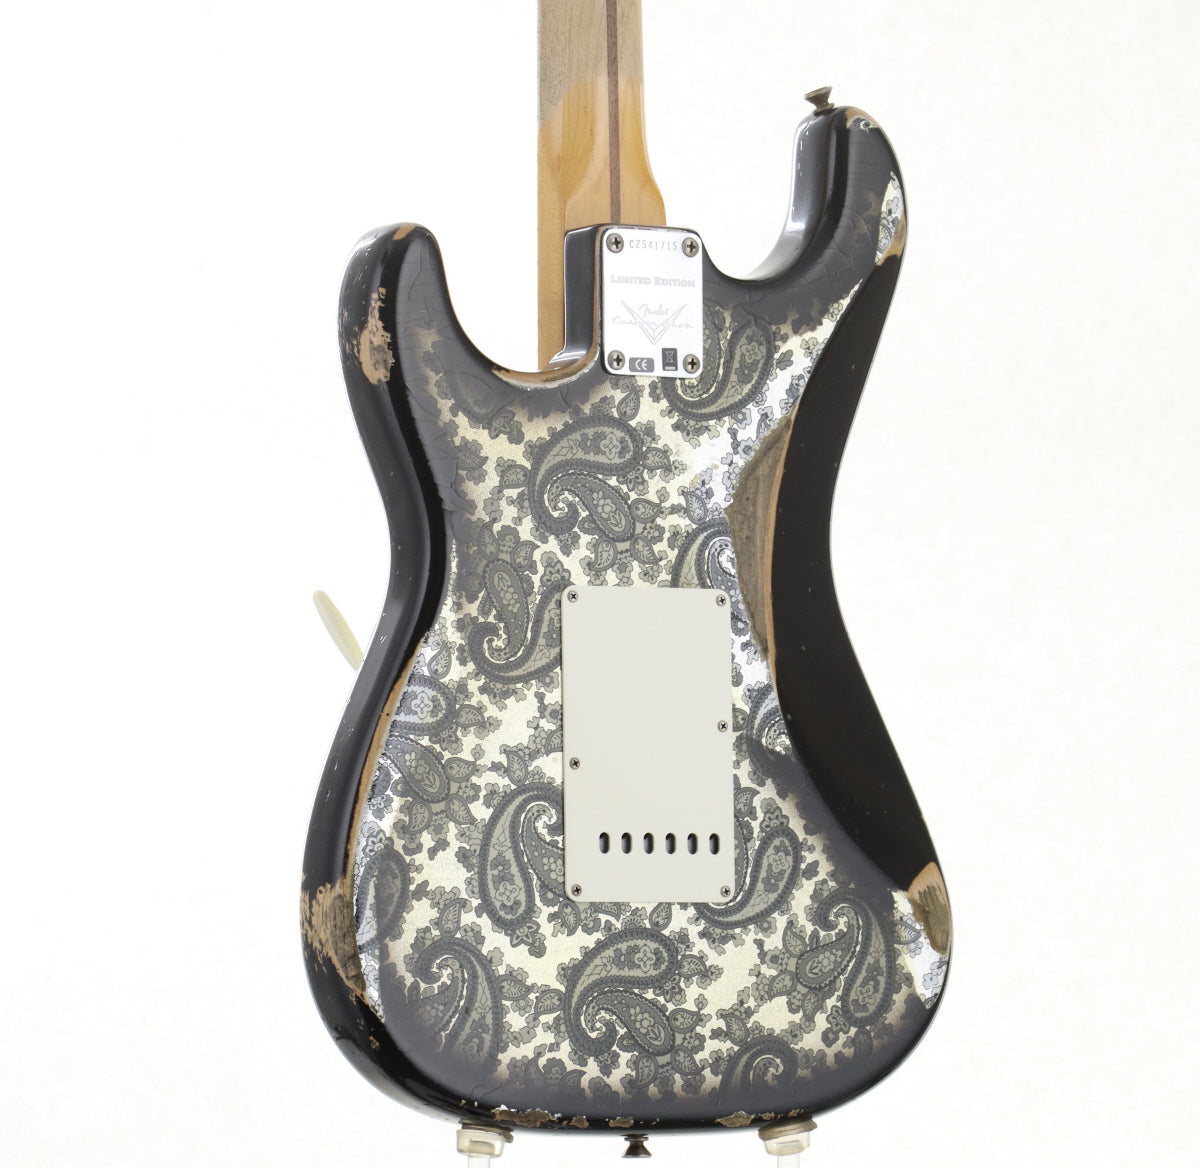 [SN CZ541715] USED Fender Custom Shop / Limited Mischief Maker Stratocaster Heavy Relic Black Paisley [10]